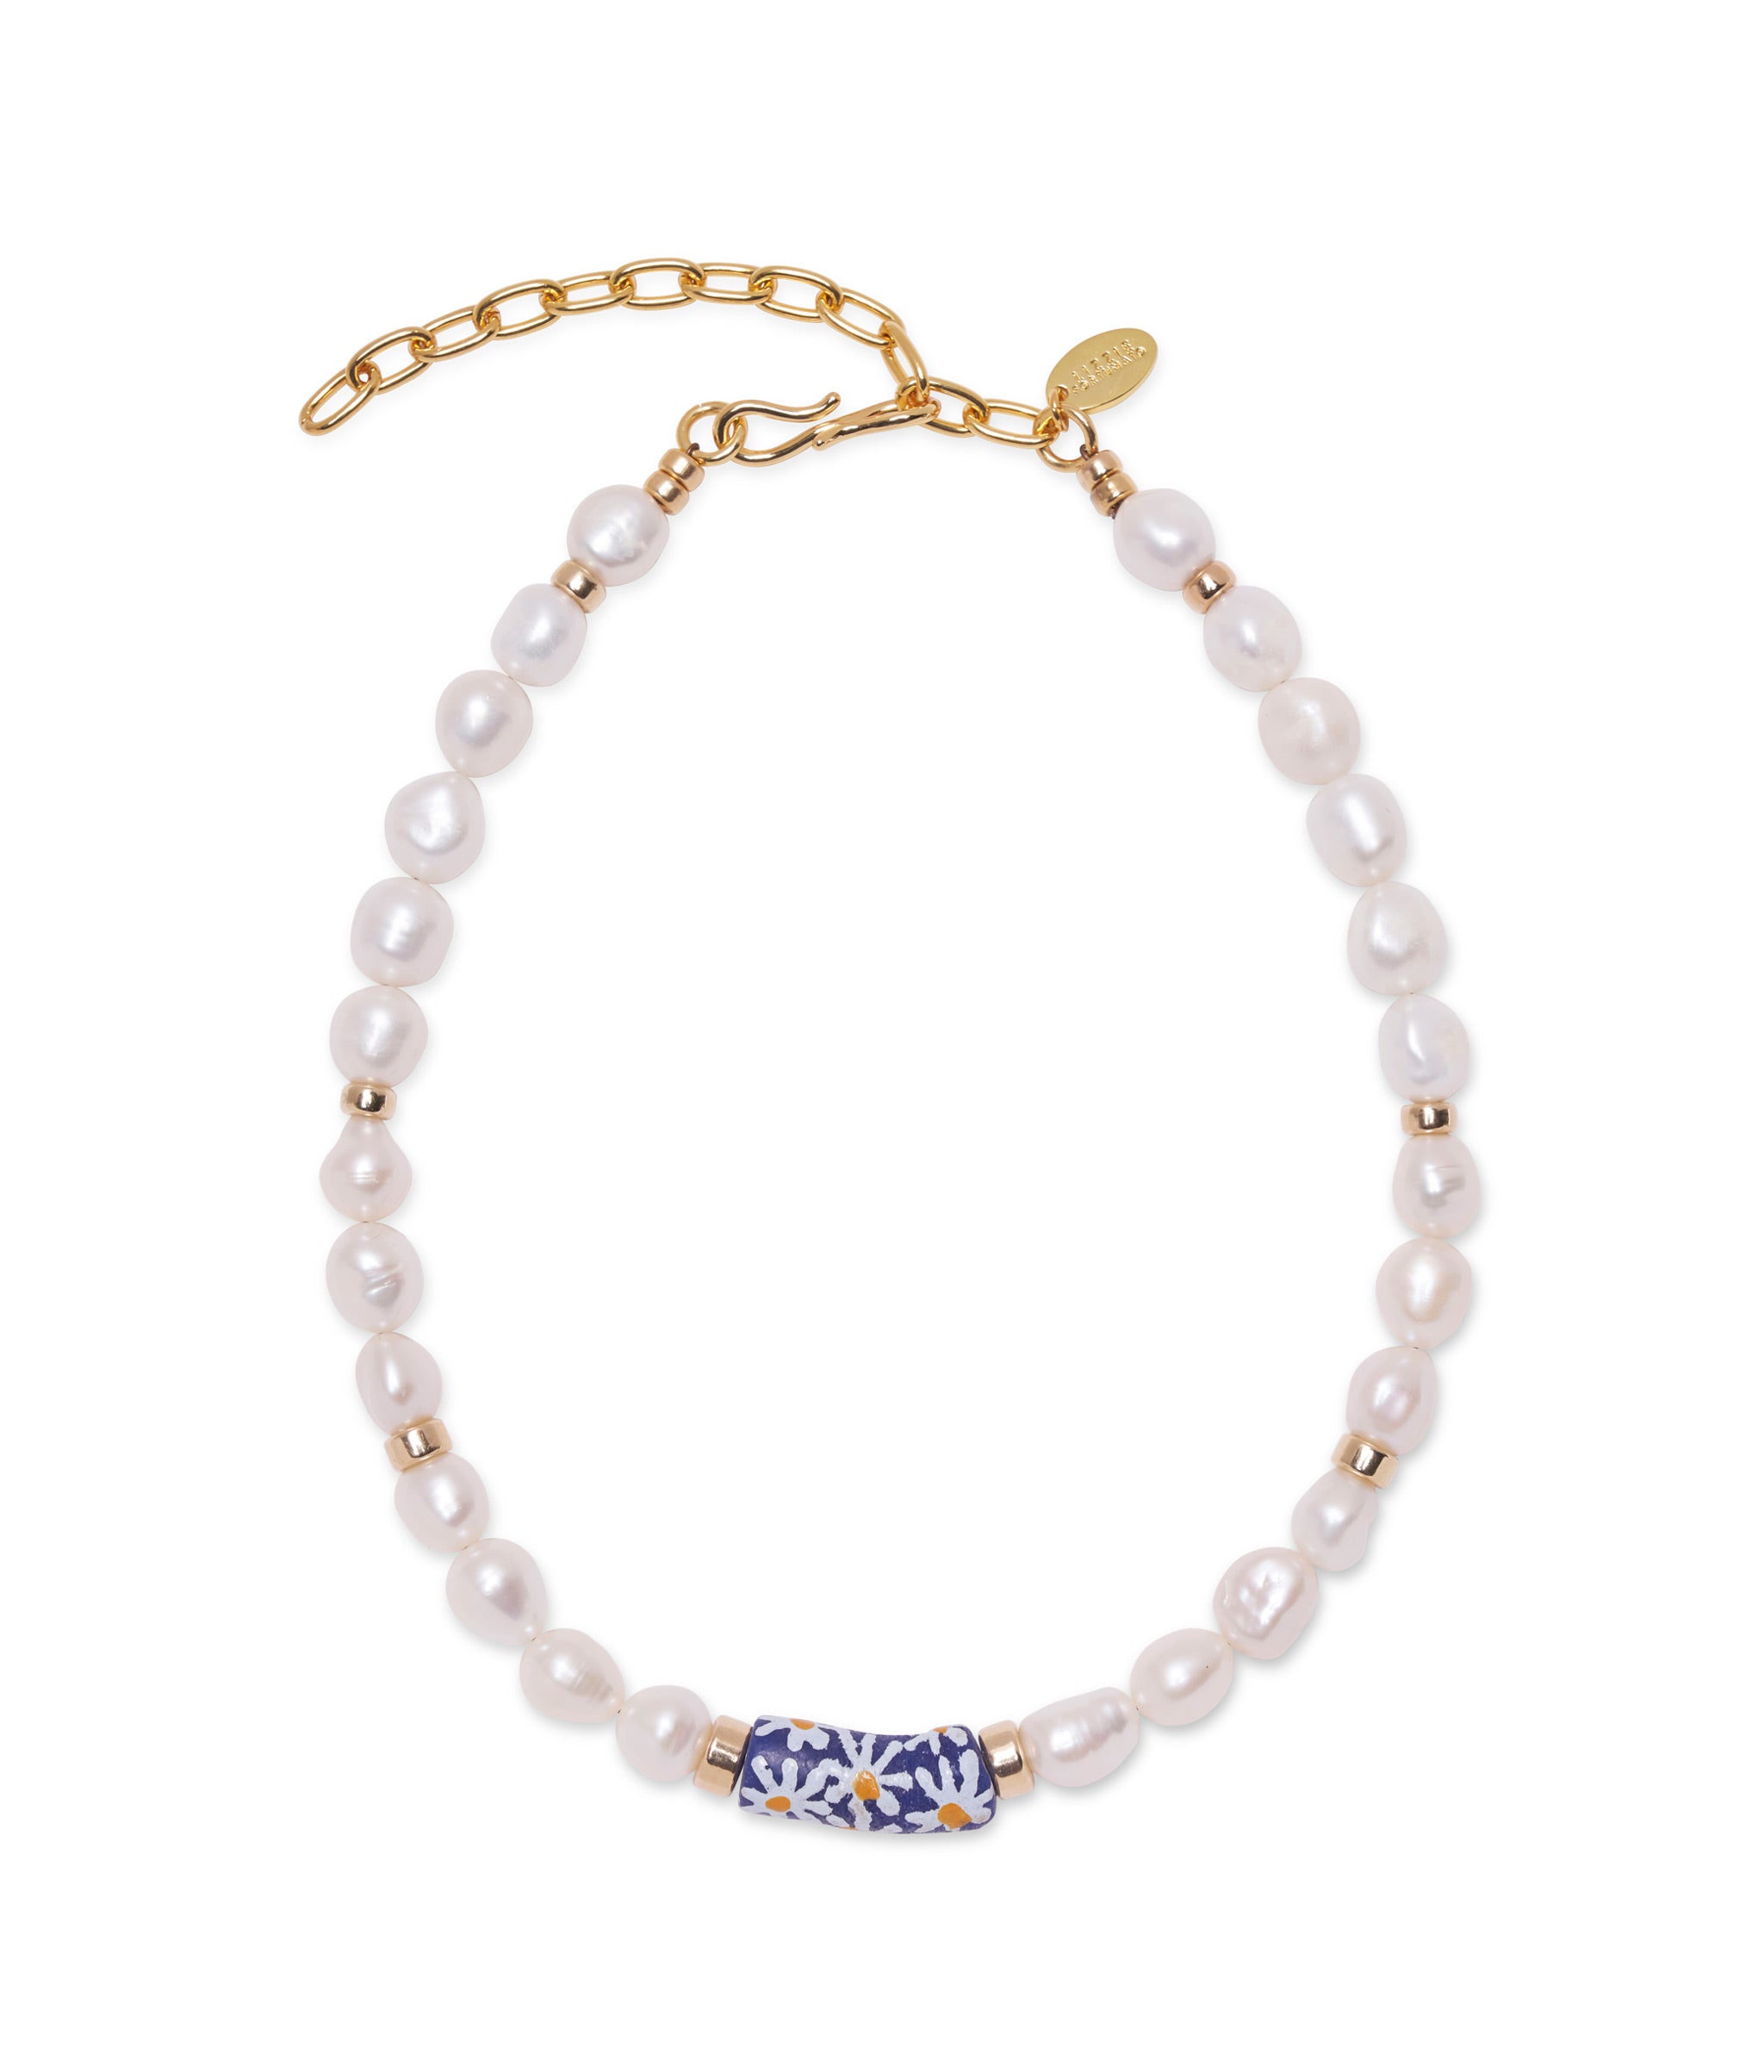 Daisy Pearl Necklace. Pearl beaded necklace with gold fill accents and painted blue flower Krobo bead, s-hook closure.